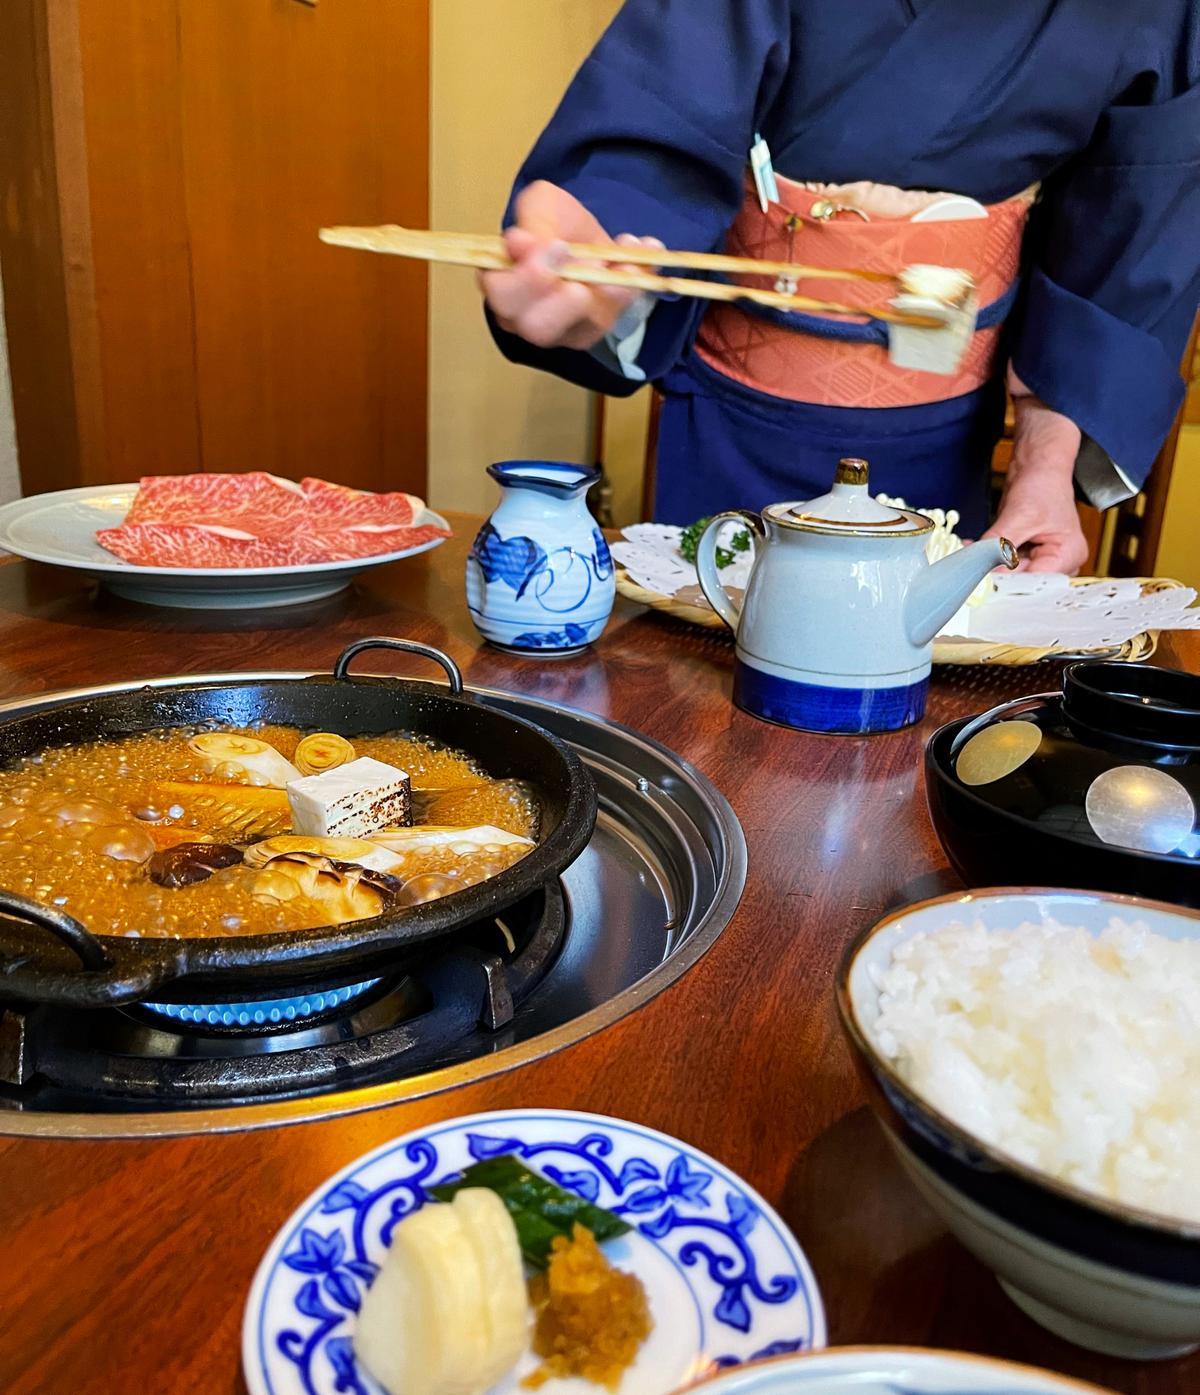 The skilled nakai, professional servers, place the ingredients in the simmering sauce to cook. (Melissa Uchiyama)